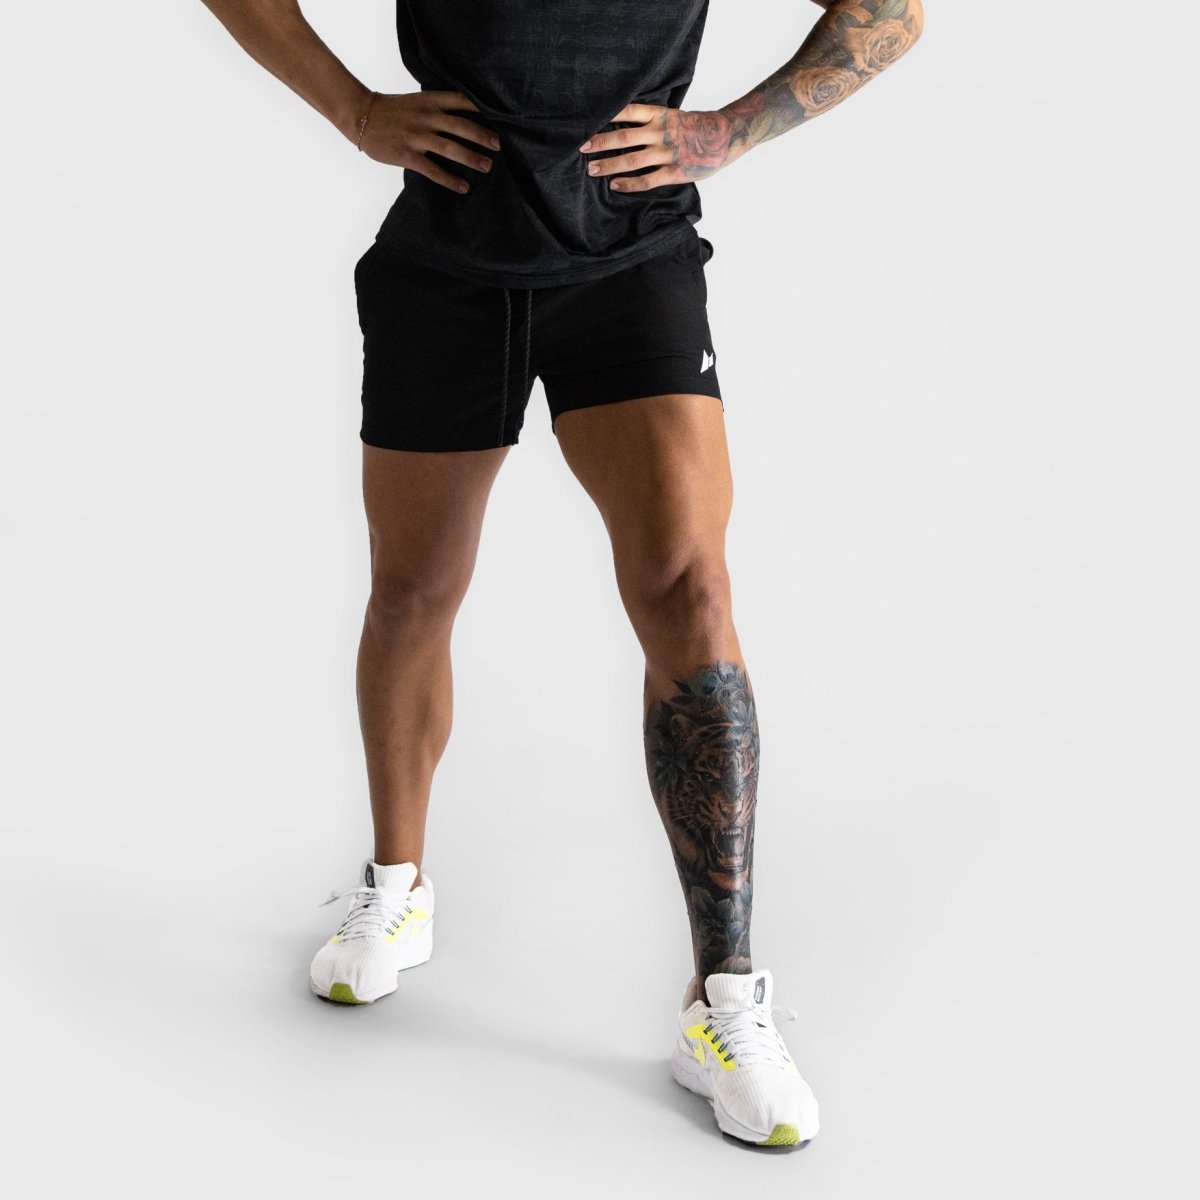 The “Best Workout Shorts” to Wear for Men 2024 - Zuva